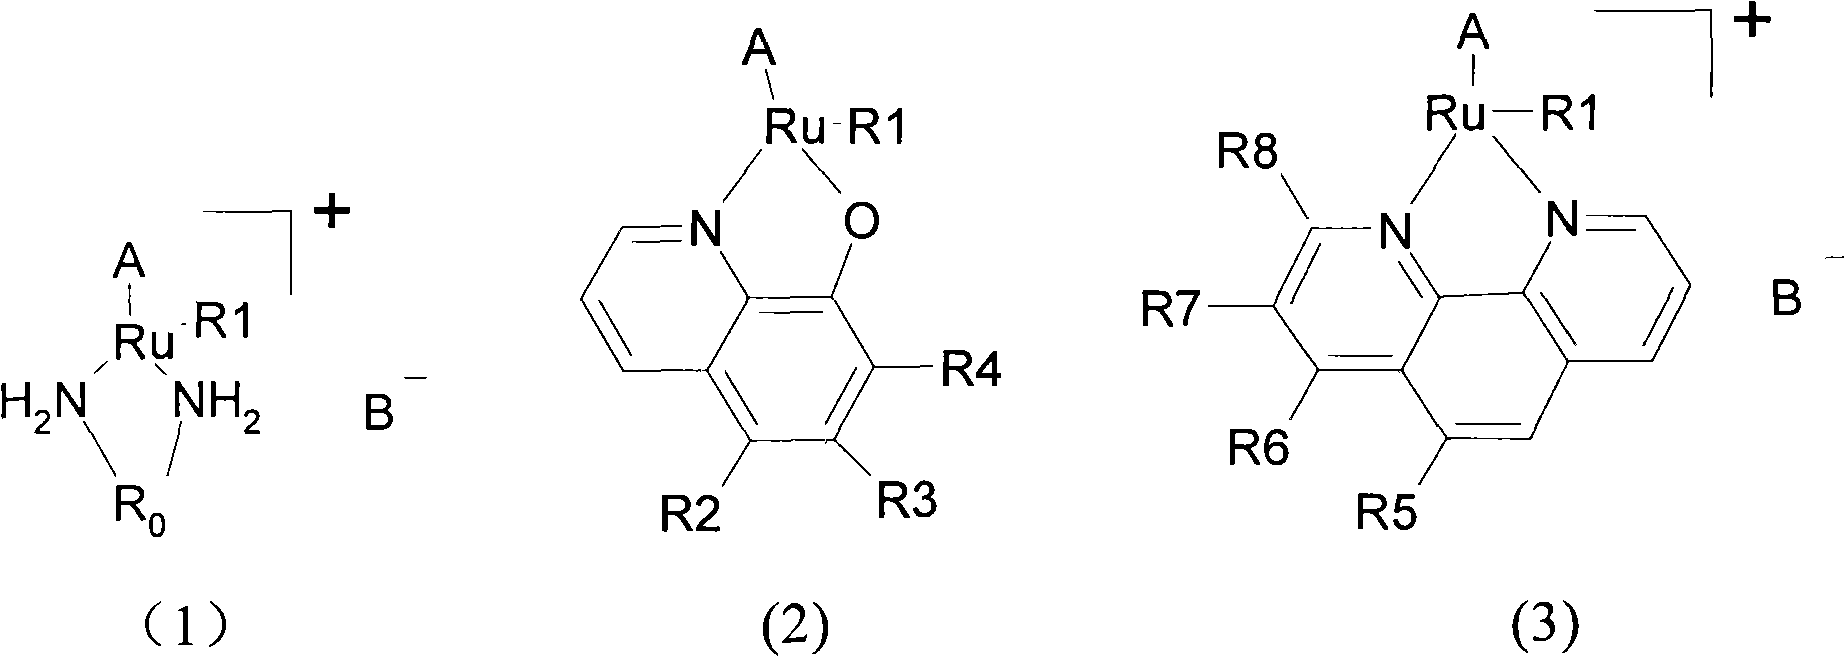 Ruthenium-containing coordination compound and preparation method thereof